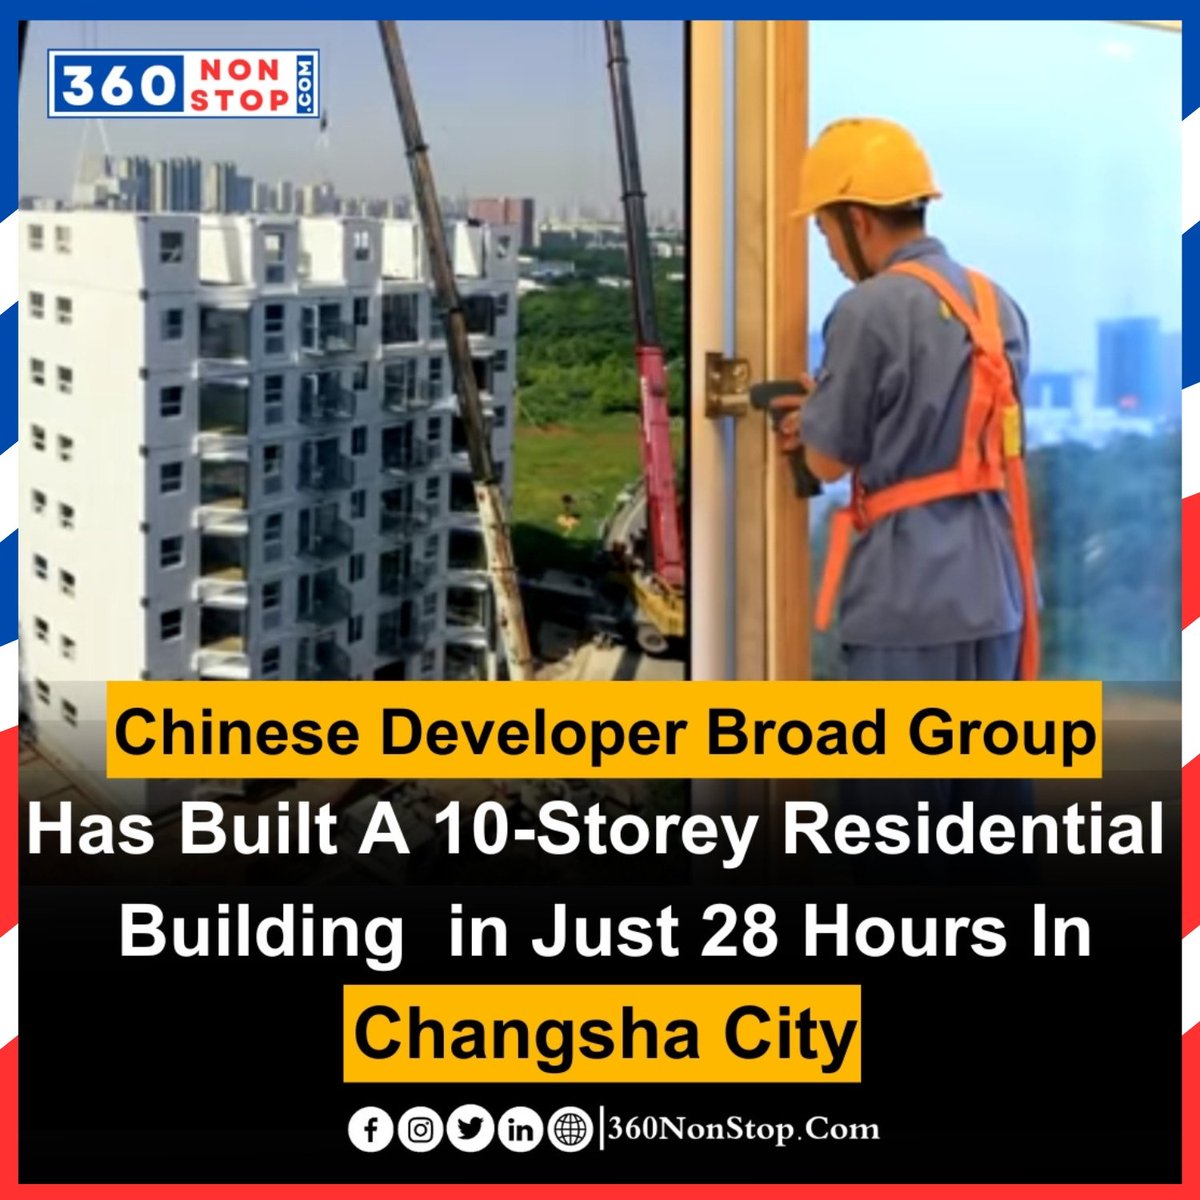 Chinese Developer Broad Group
 Has Built A 10-Storey Residential  Building  in Just 28 Hours In Changsha City.

#InnovativeConstruction #RapidBuildingTech #BroadGroupEngineering #EfficiencyInConstruction #ImpressiveFeats #ChangingSkylines
#360NonStop